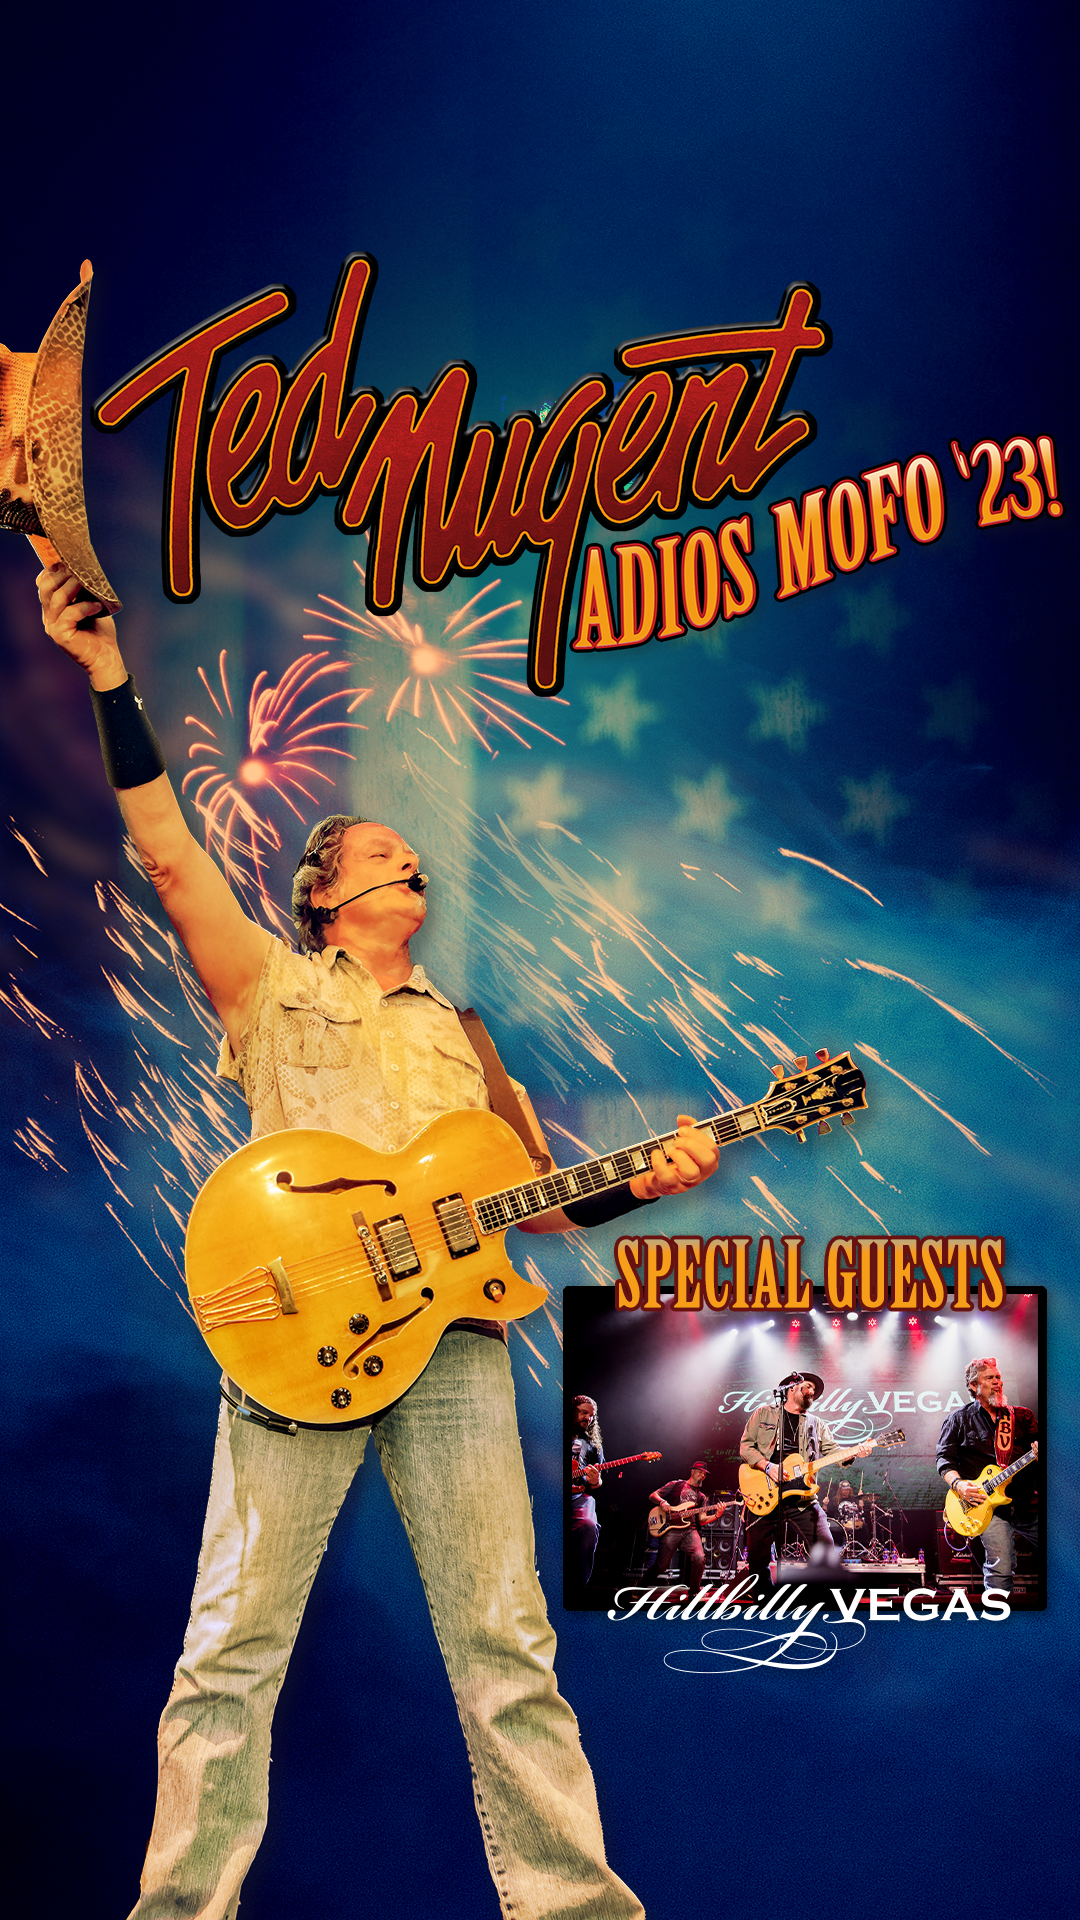 Ted Nugent - Admat 9x16-HBV-2